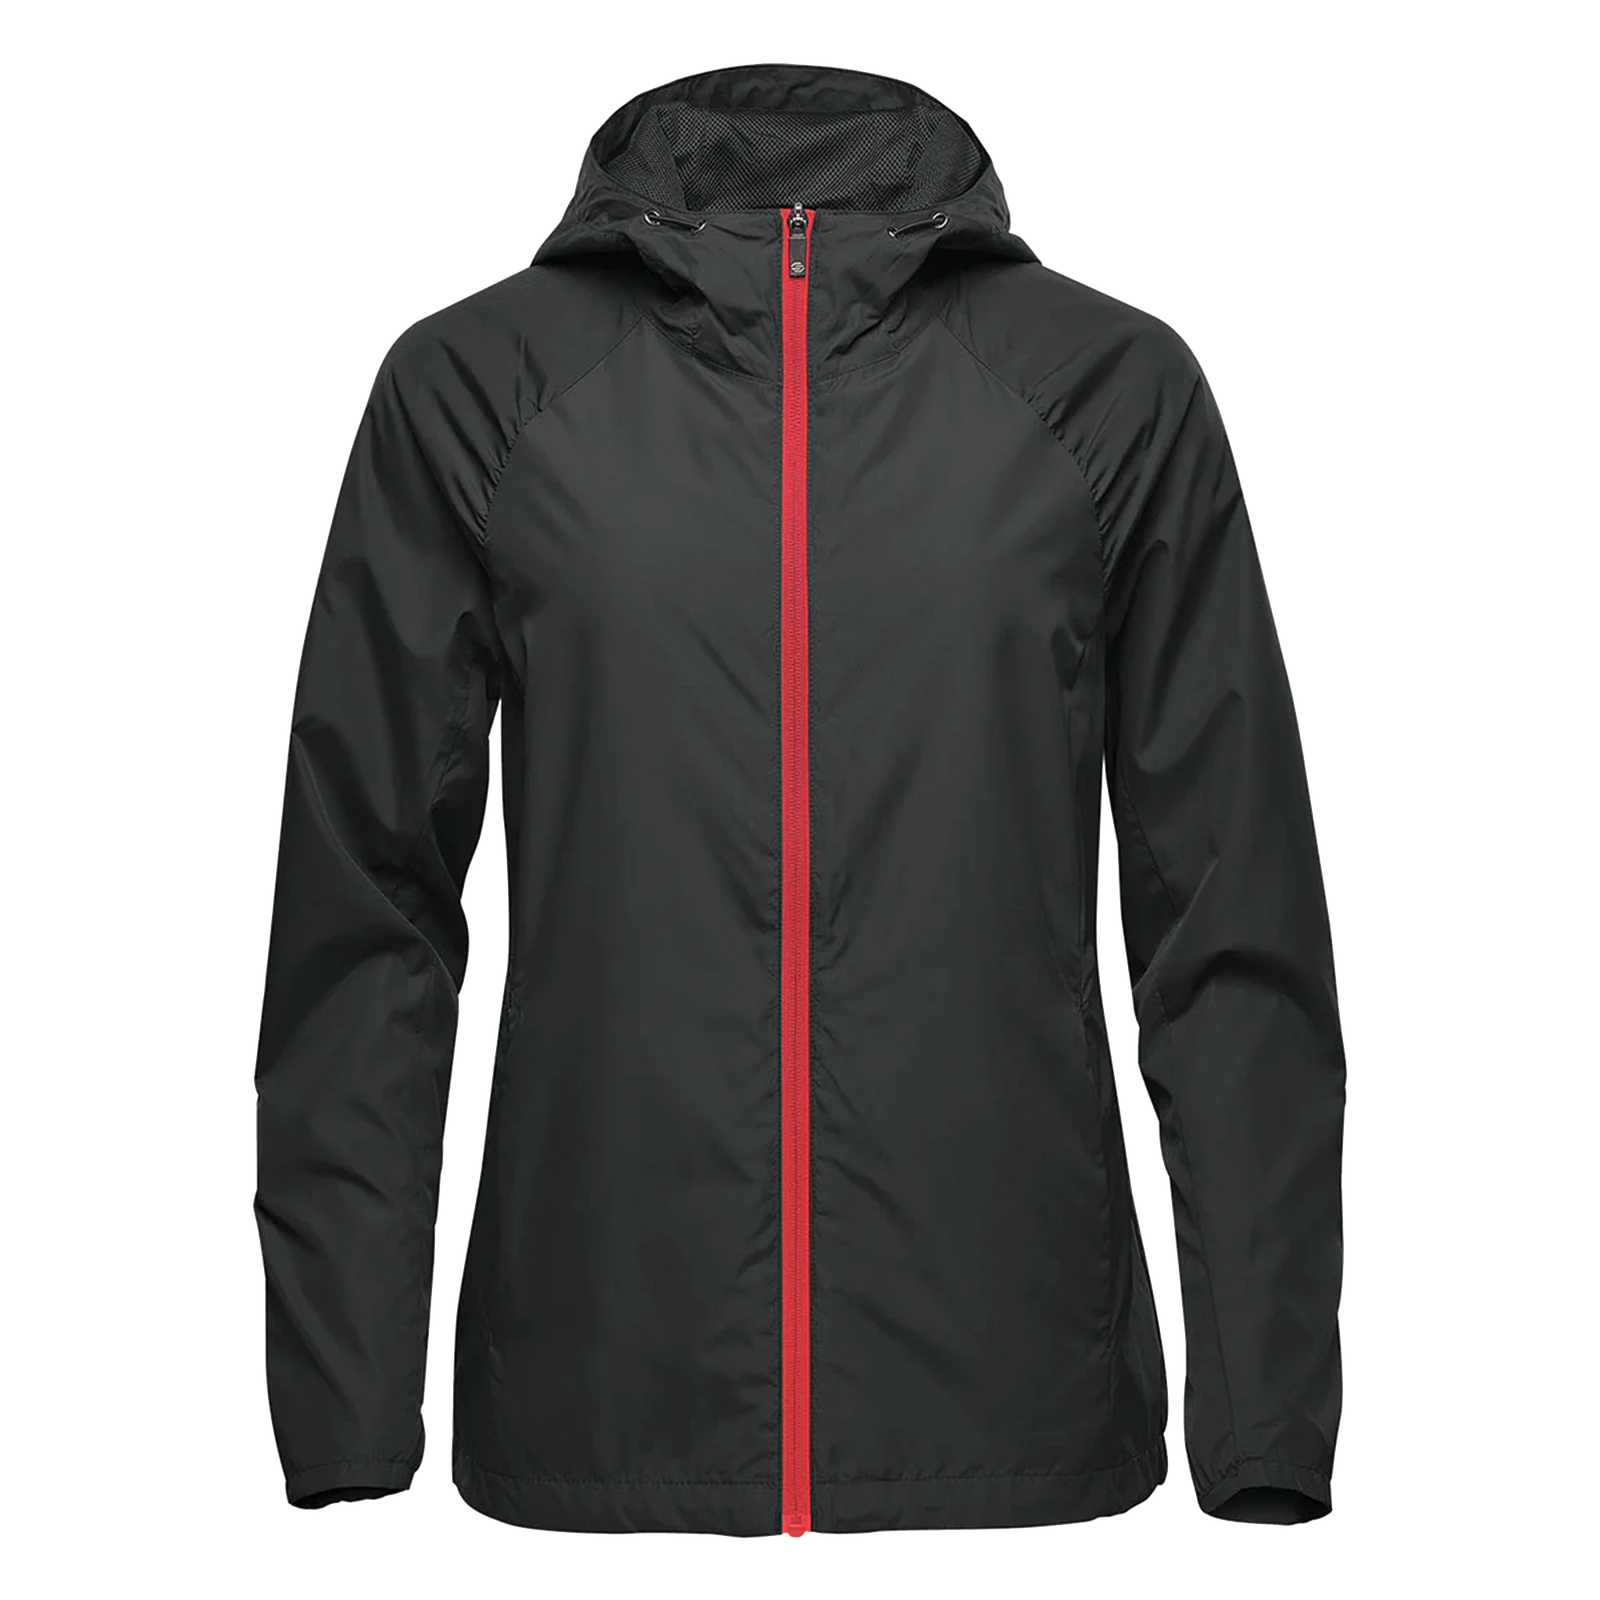 Stormtech Pacifica Jacket - Women's Sizing XS-2XL - Black/Red